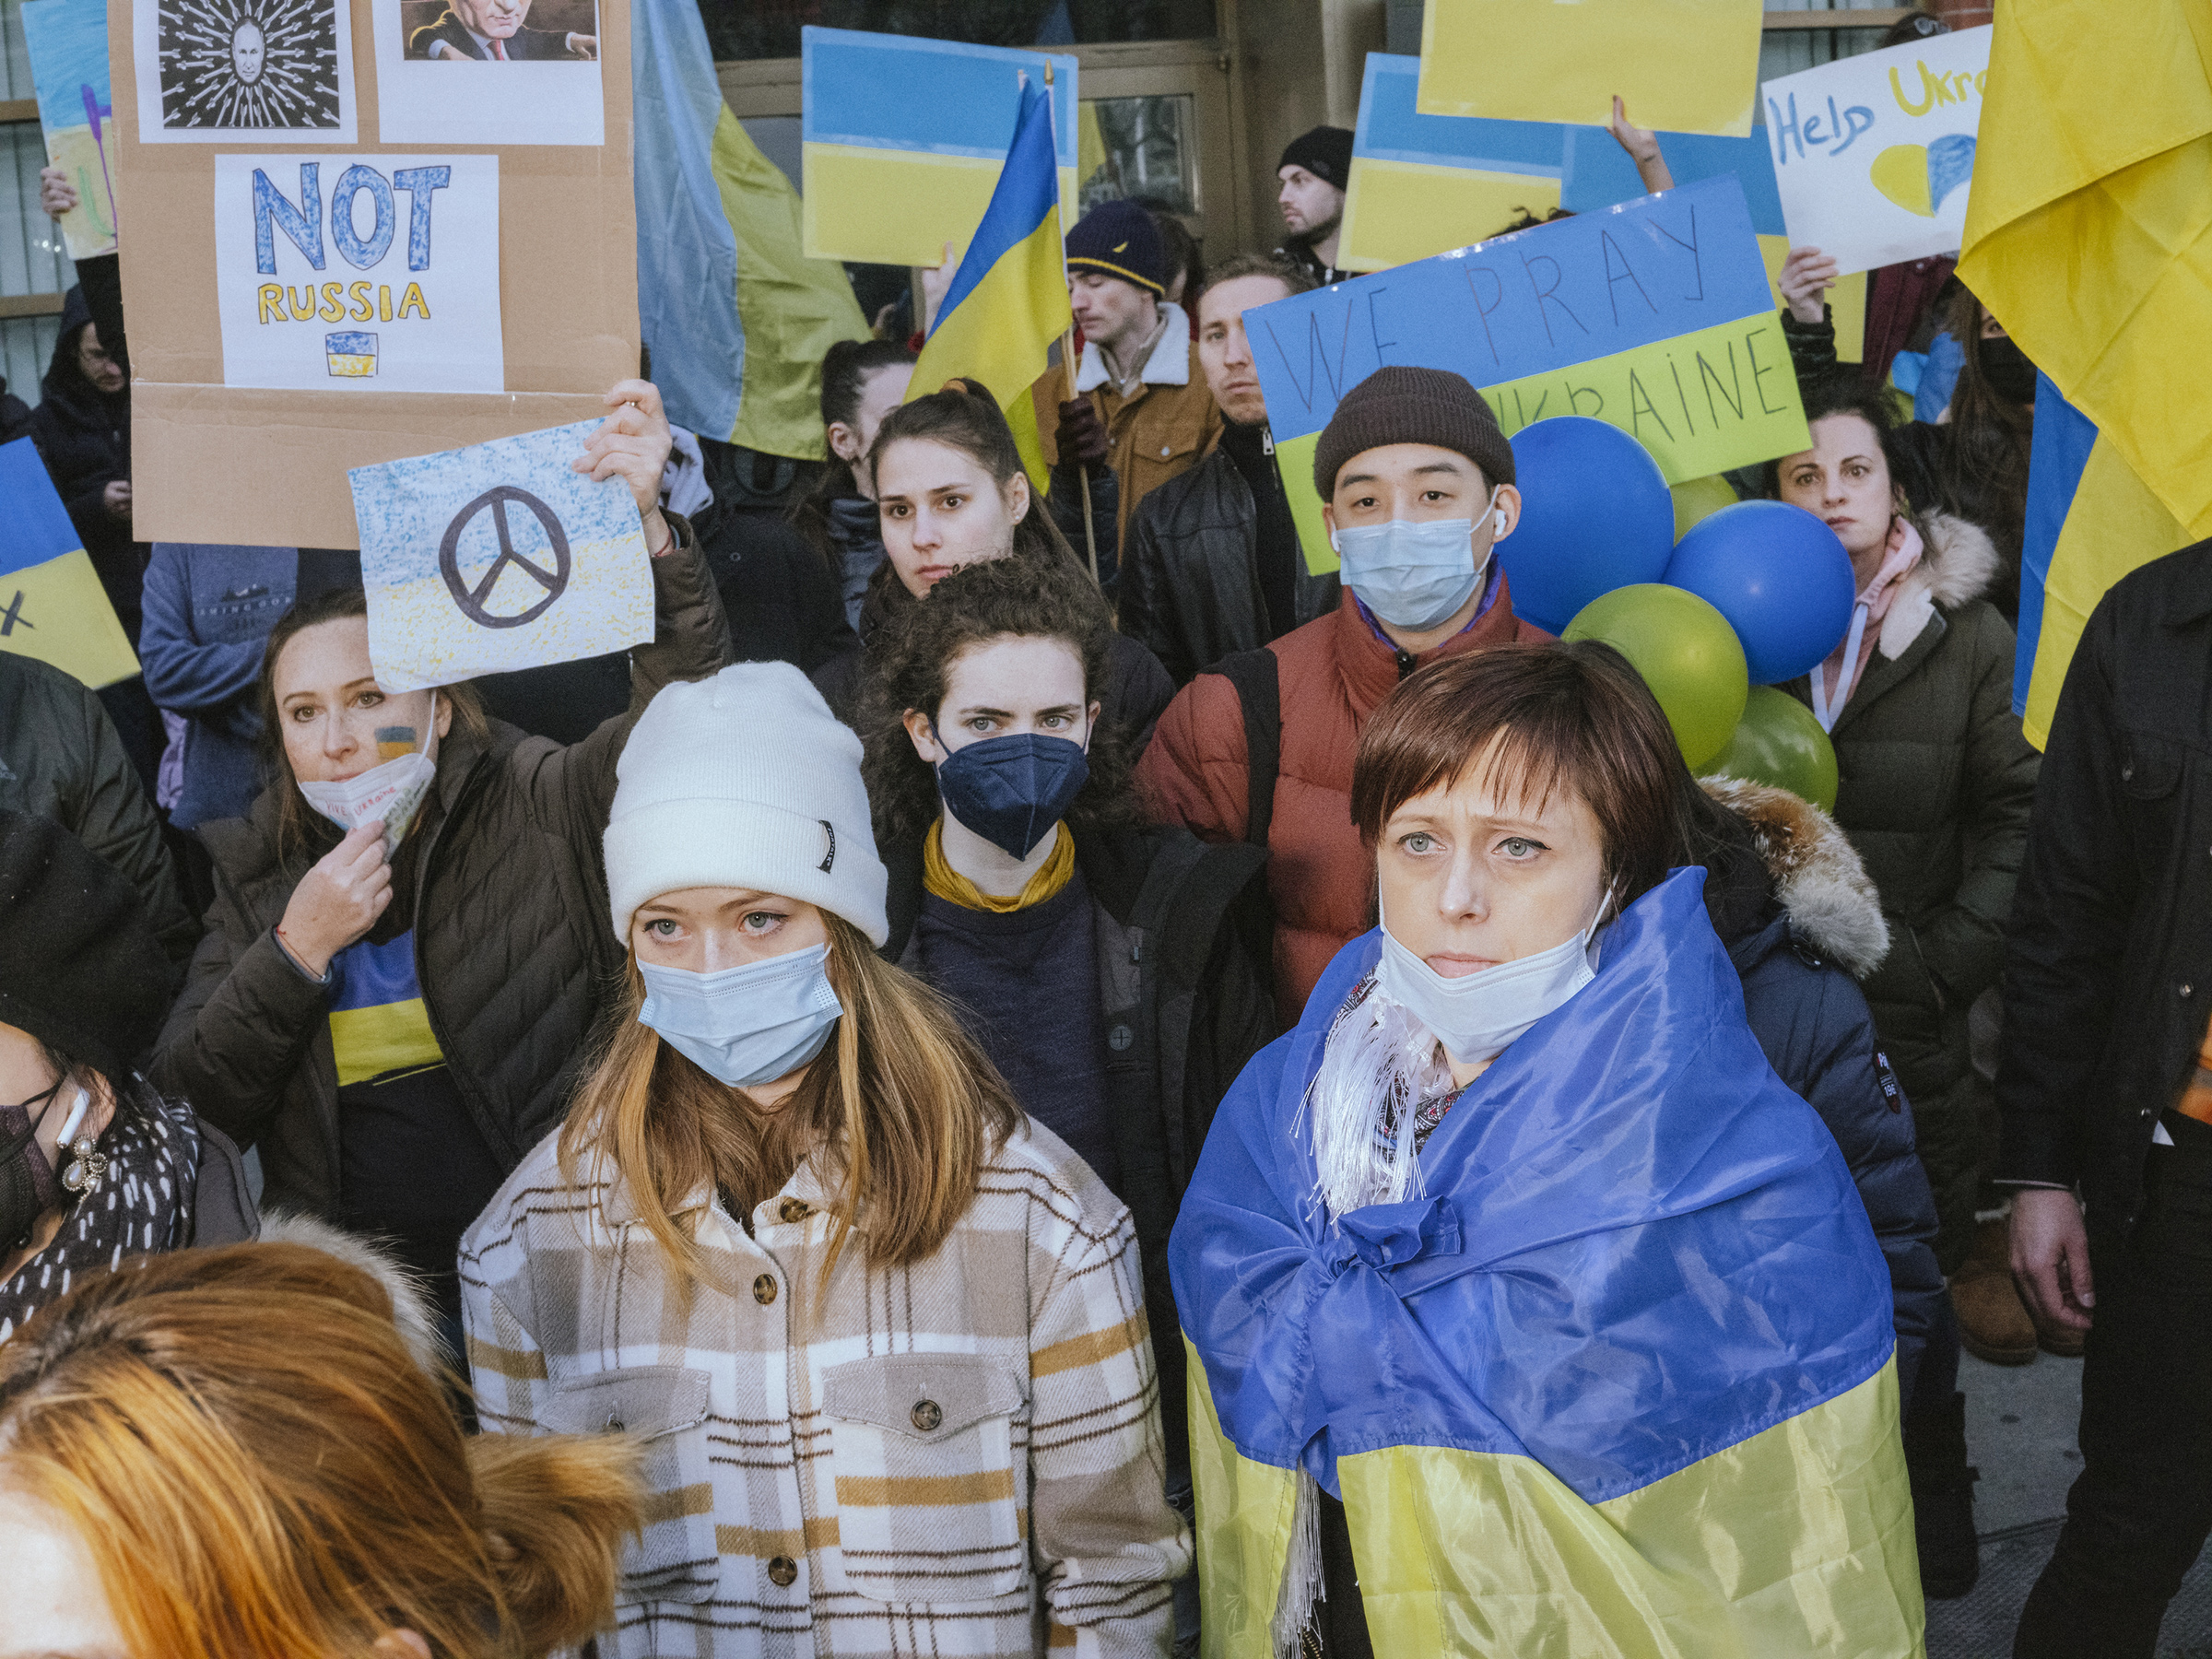 Demonstrators during a protest against the Russian invasion of Ukraine in front of the United Nations Headquarters in New York City on Feb. 27 (Ismail Ferdous—Bloomberg/Getty Images)